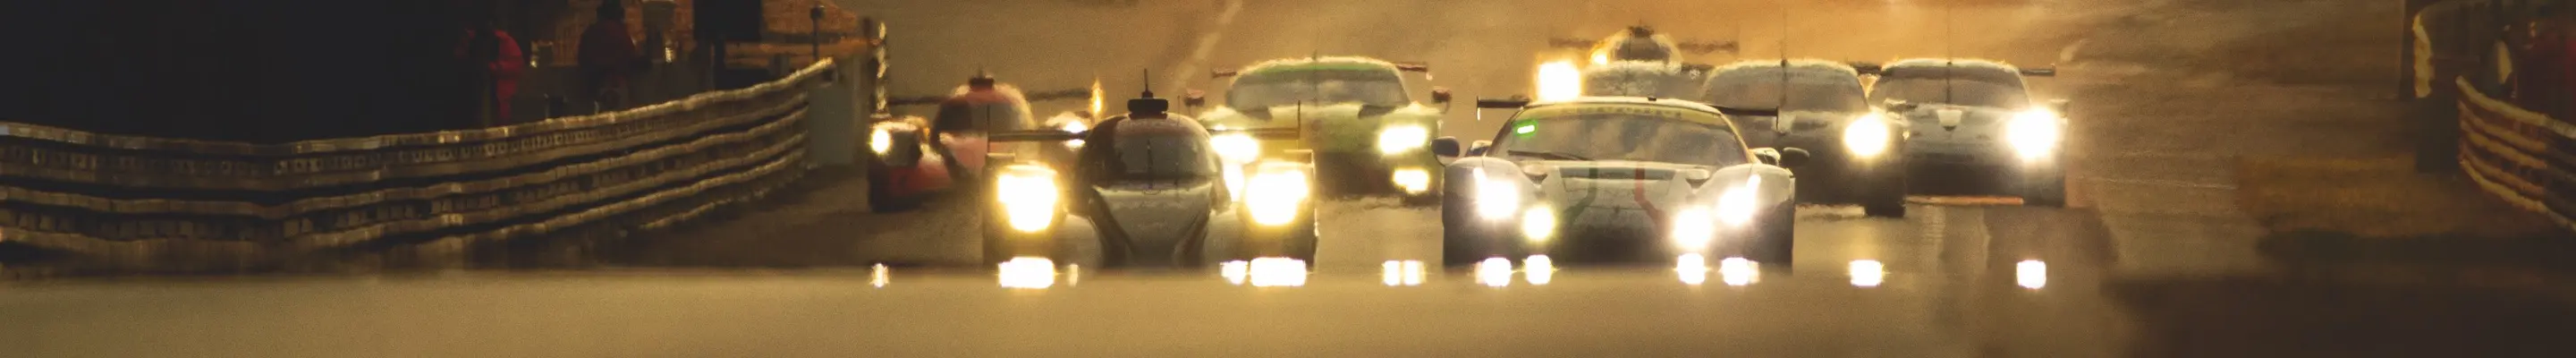 THE 24 HOURS OF LE MANS